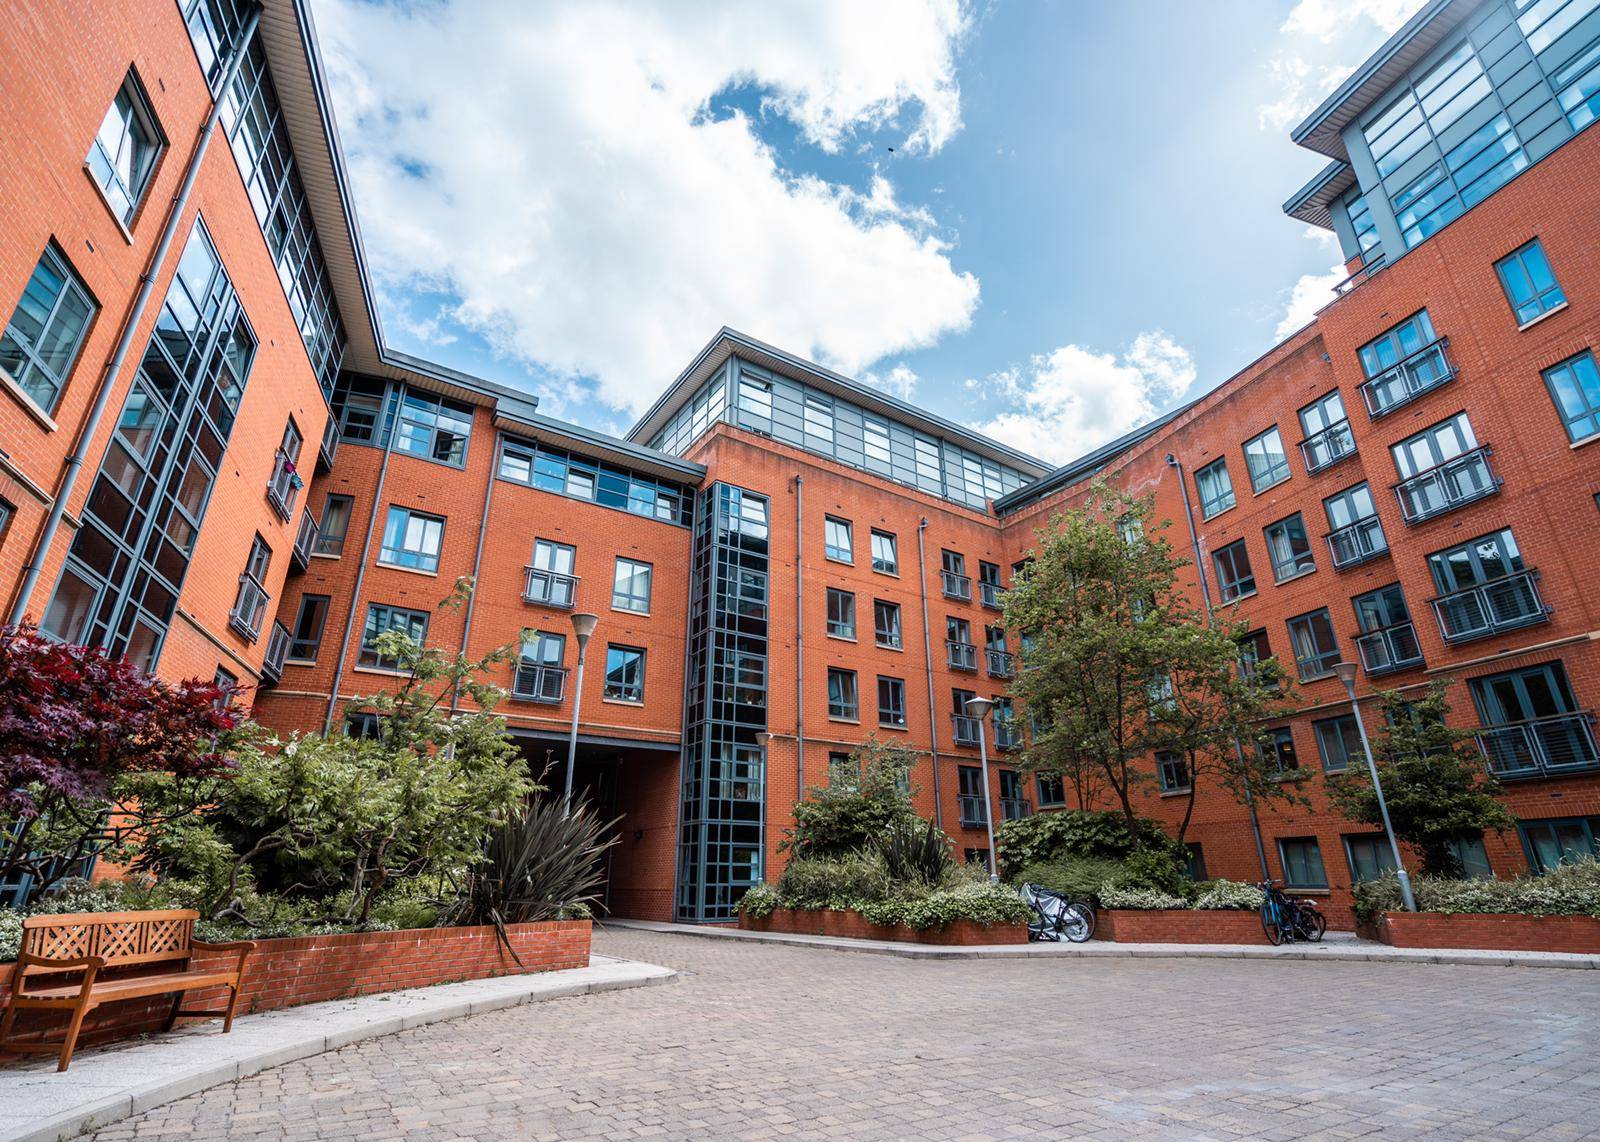 An affordable modern apartment conveniently situated on the outskirts of Manchester City Centre.